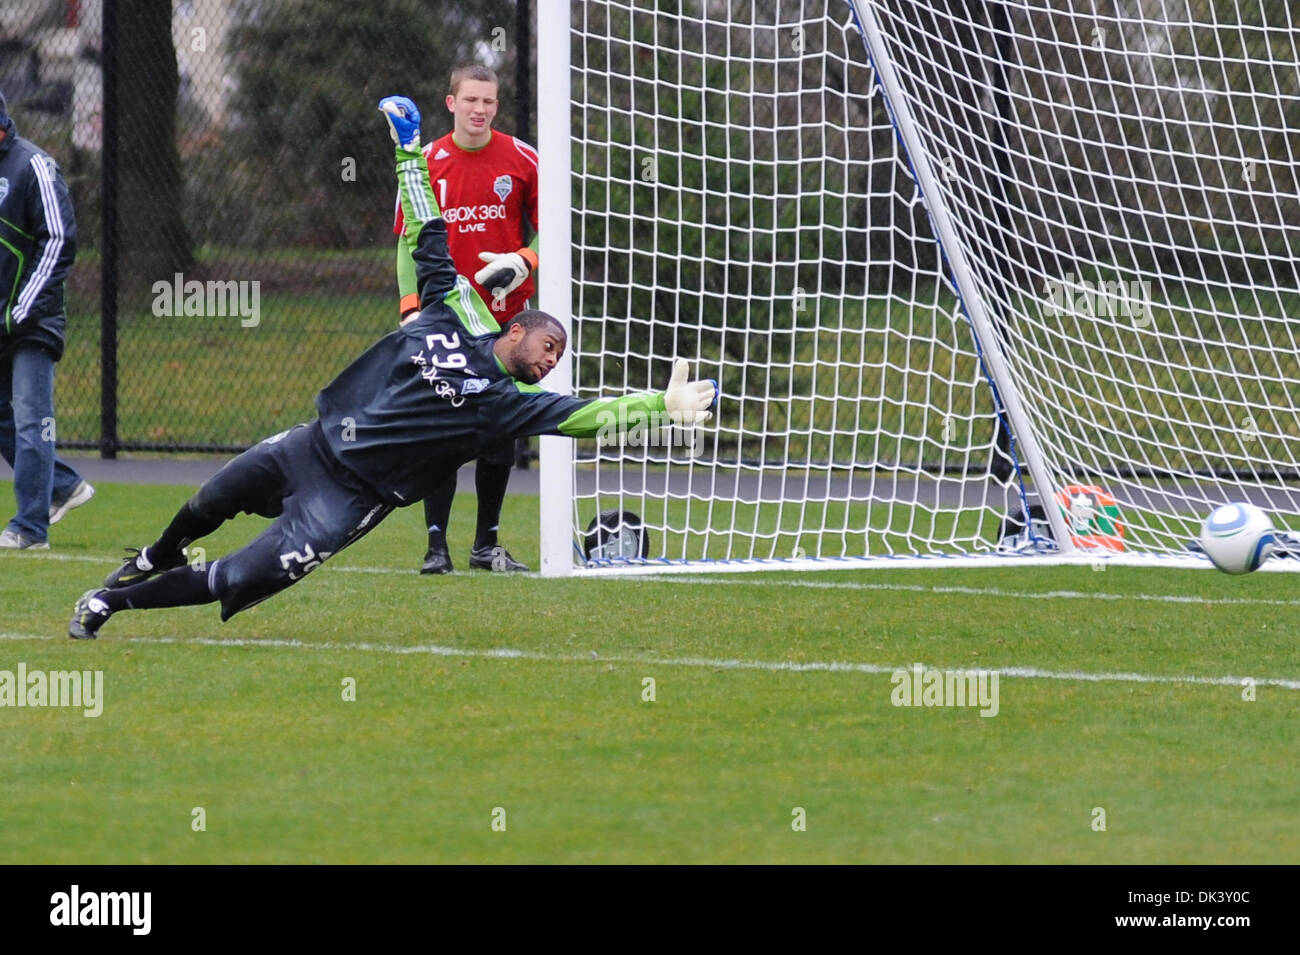 March 12, 2011 - Tukwila, Washington, United States of America - Seattle Sounders FC Goal Keeper, Josh Ford dives in an attempt to save a shot on goal at Sounders training. (Credit Image: © Chris Coulter/Southcreek Global/ZUMApress.com) Stock Photo